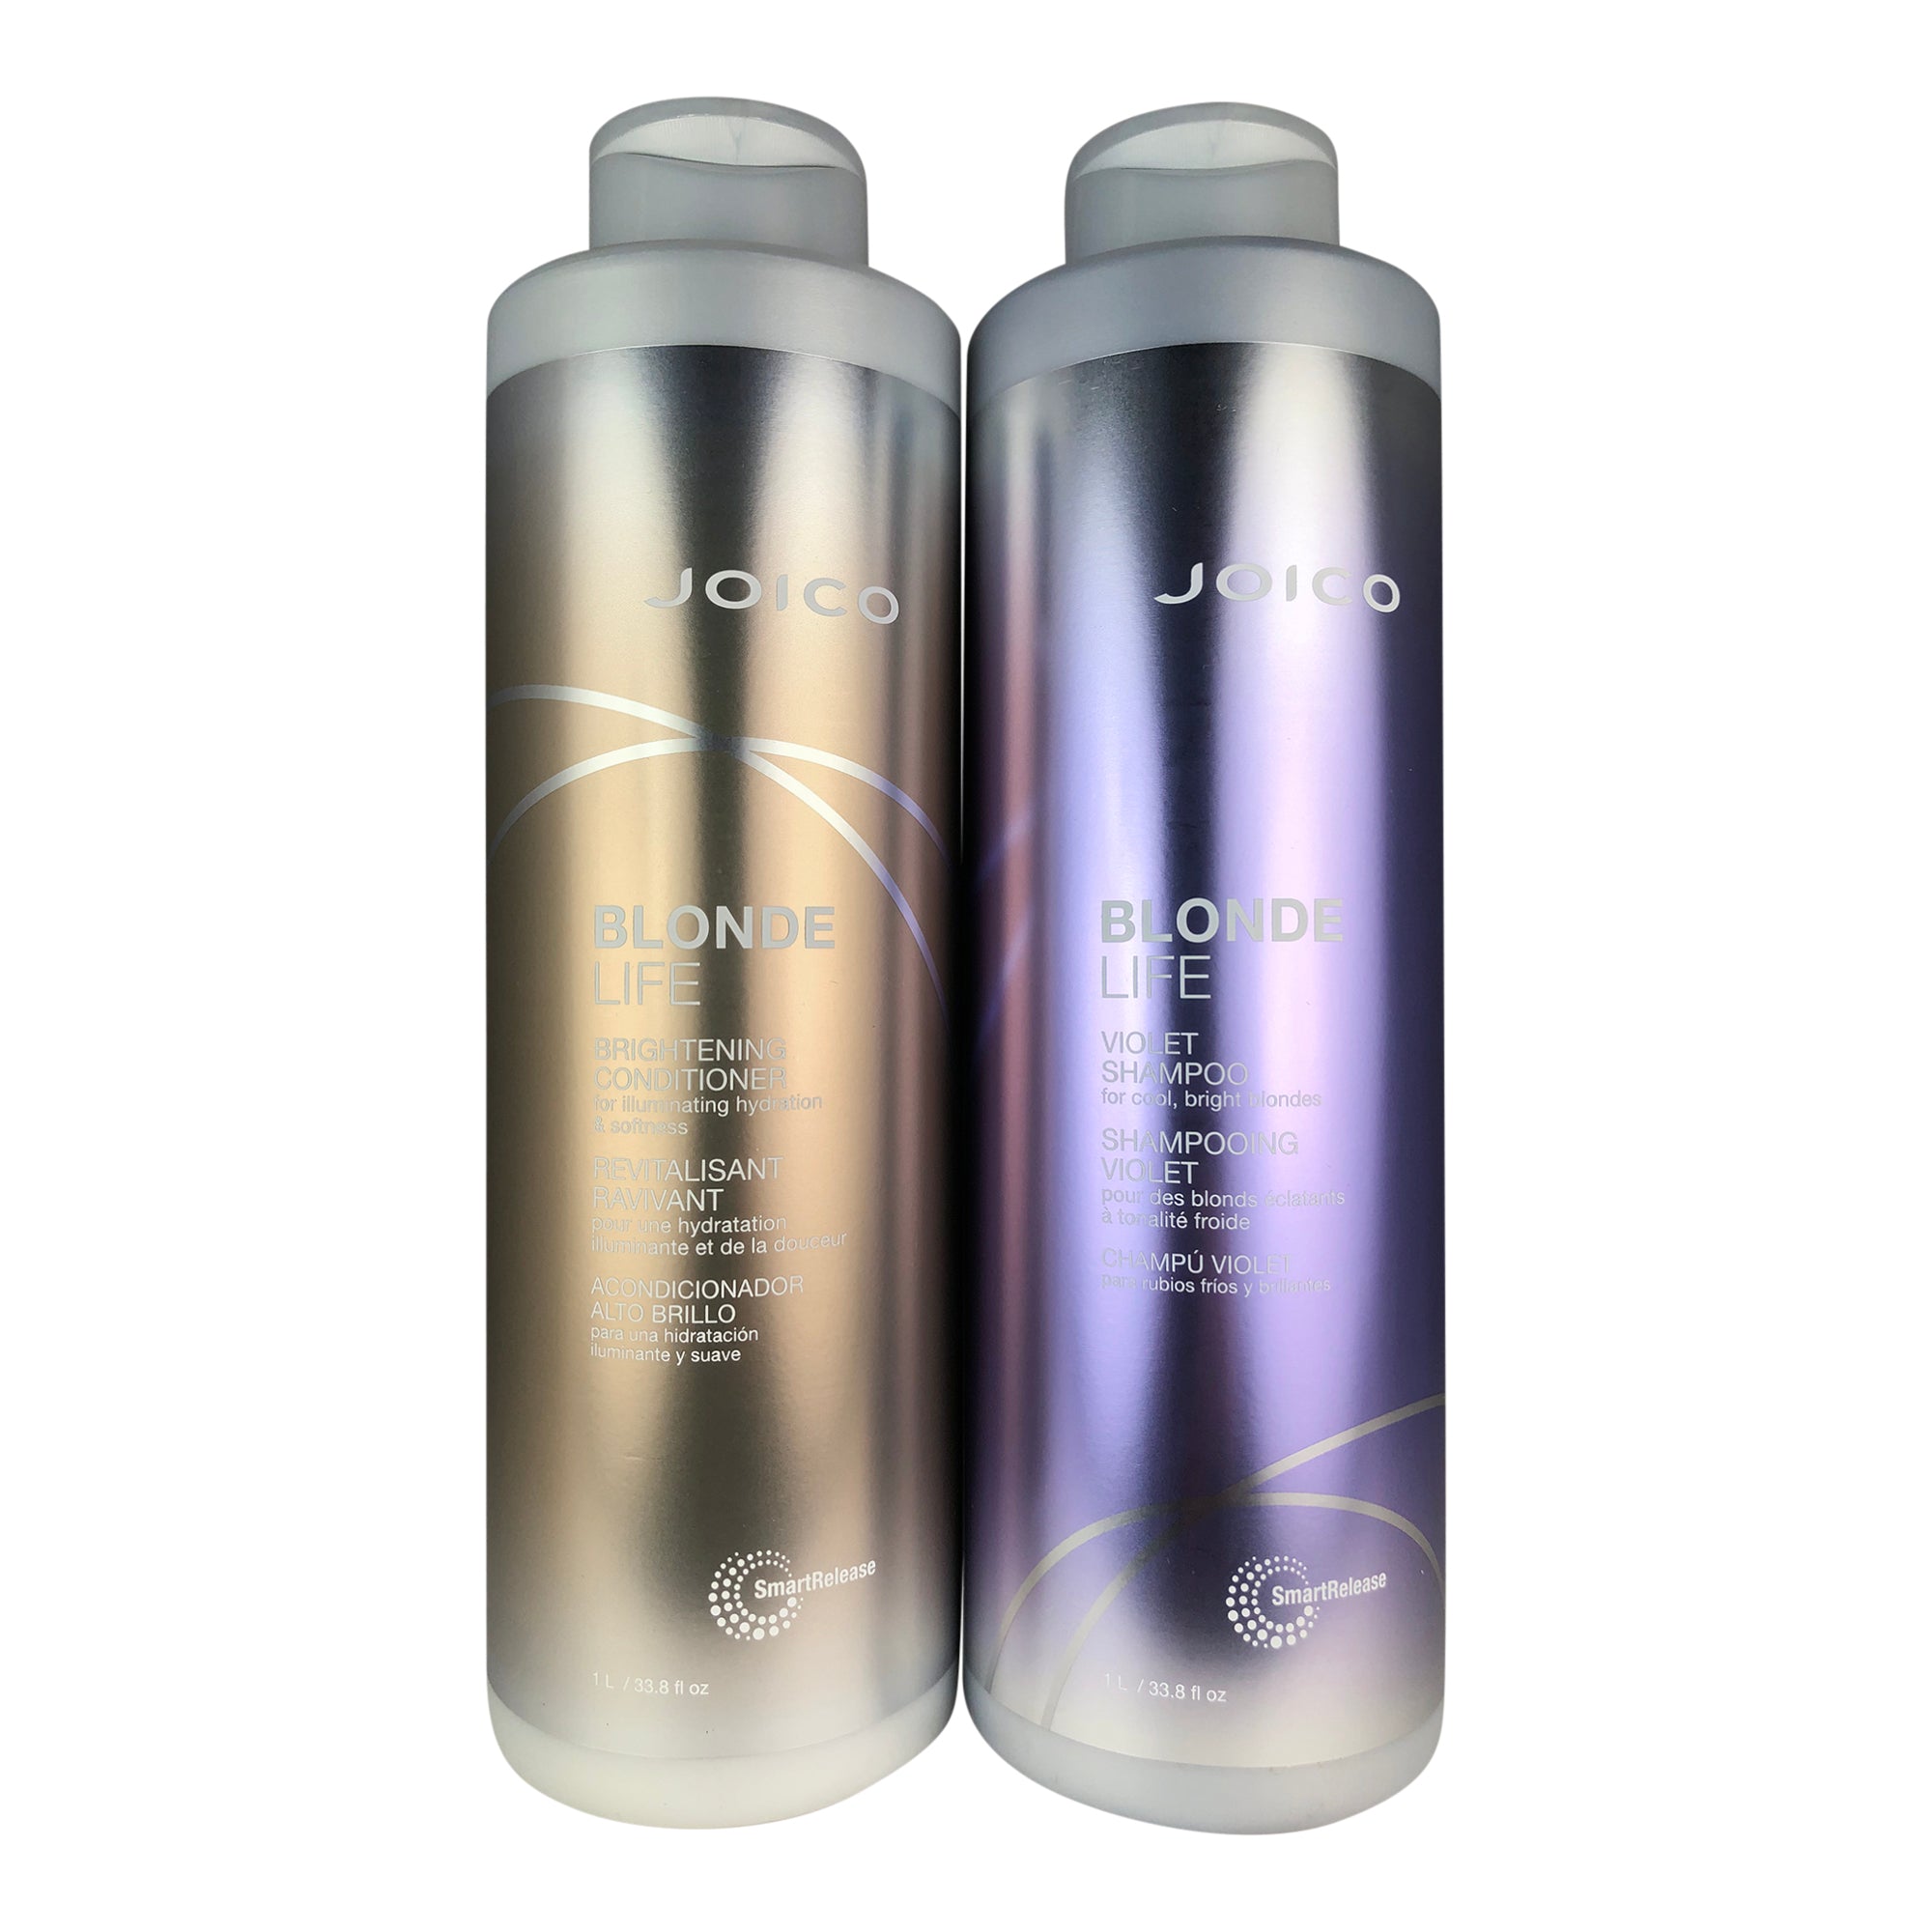 Joico Blonde Life Duo (Violet Shampoo and Conditioner)